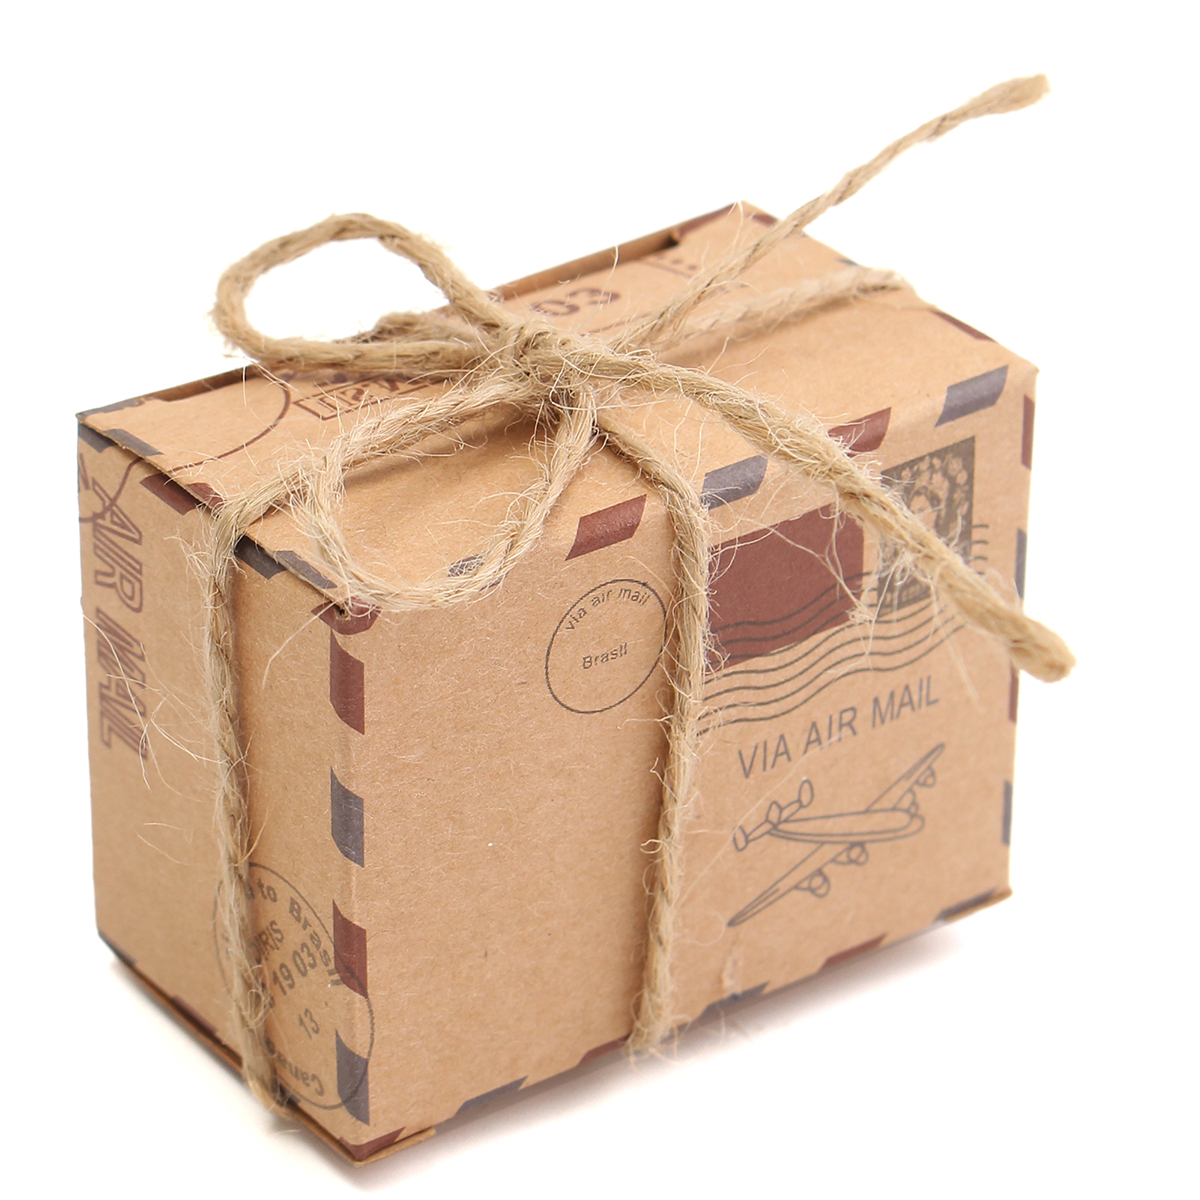 50pcs-Kraft-Paper-Box-Airplane-Mail-Candy-Box-Rustic-Wedding-Favors-Shabby-Vintage-Gift-Packing-Bags-1110199